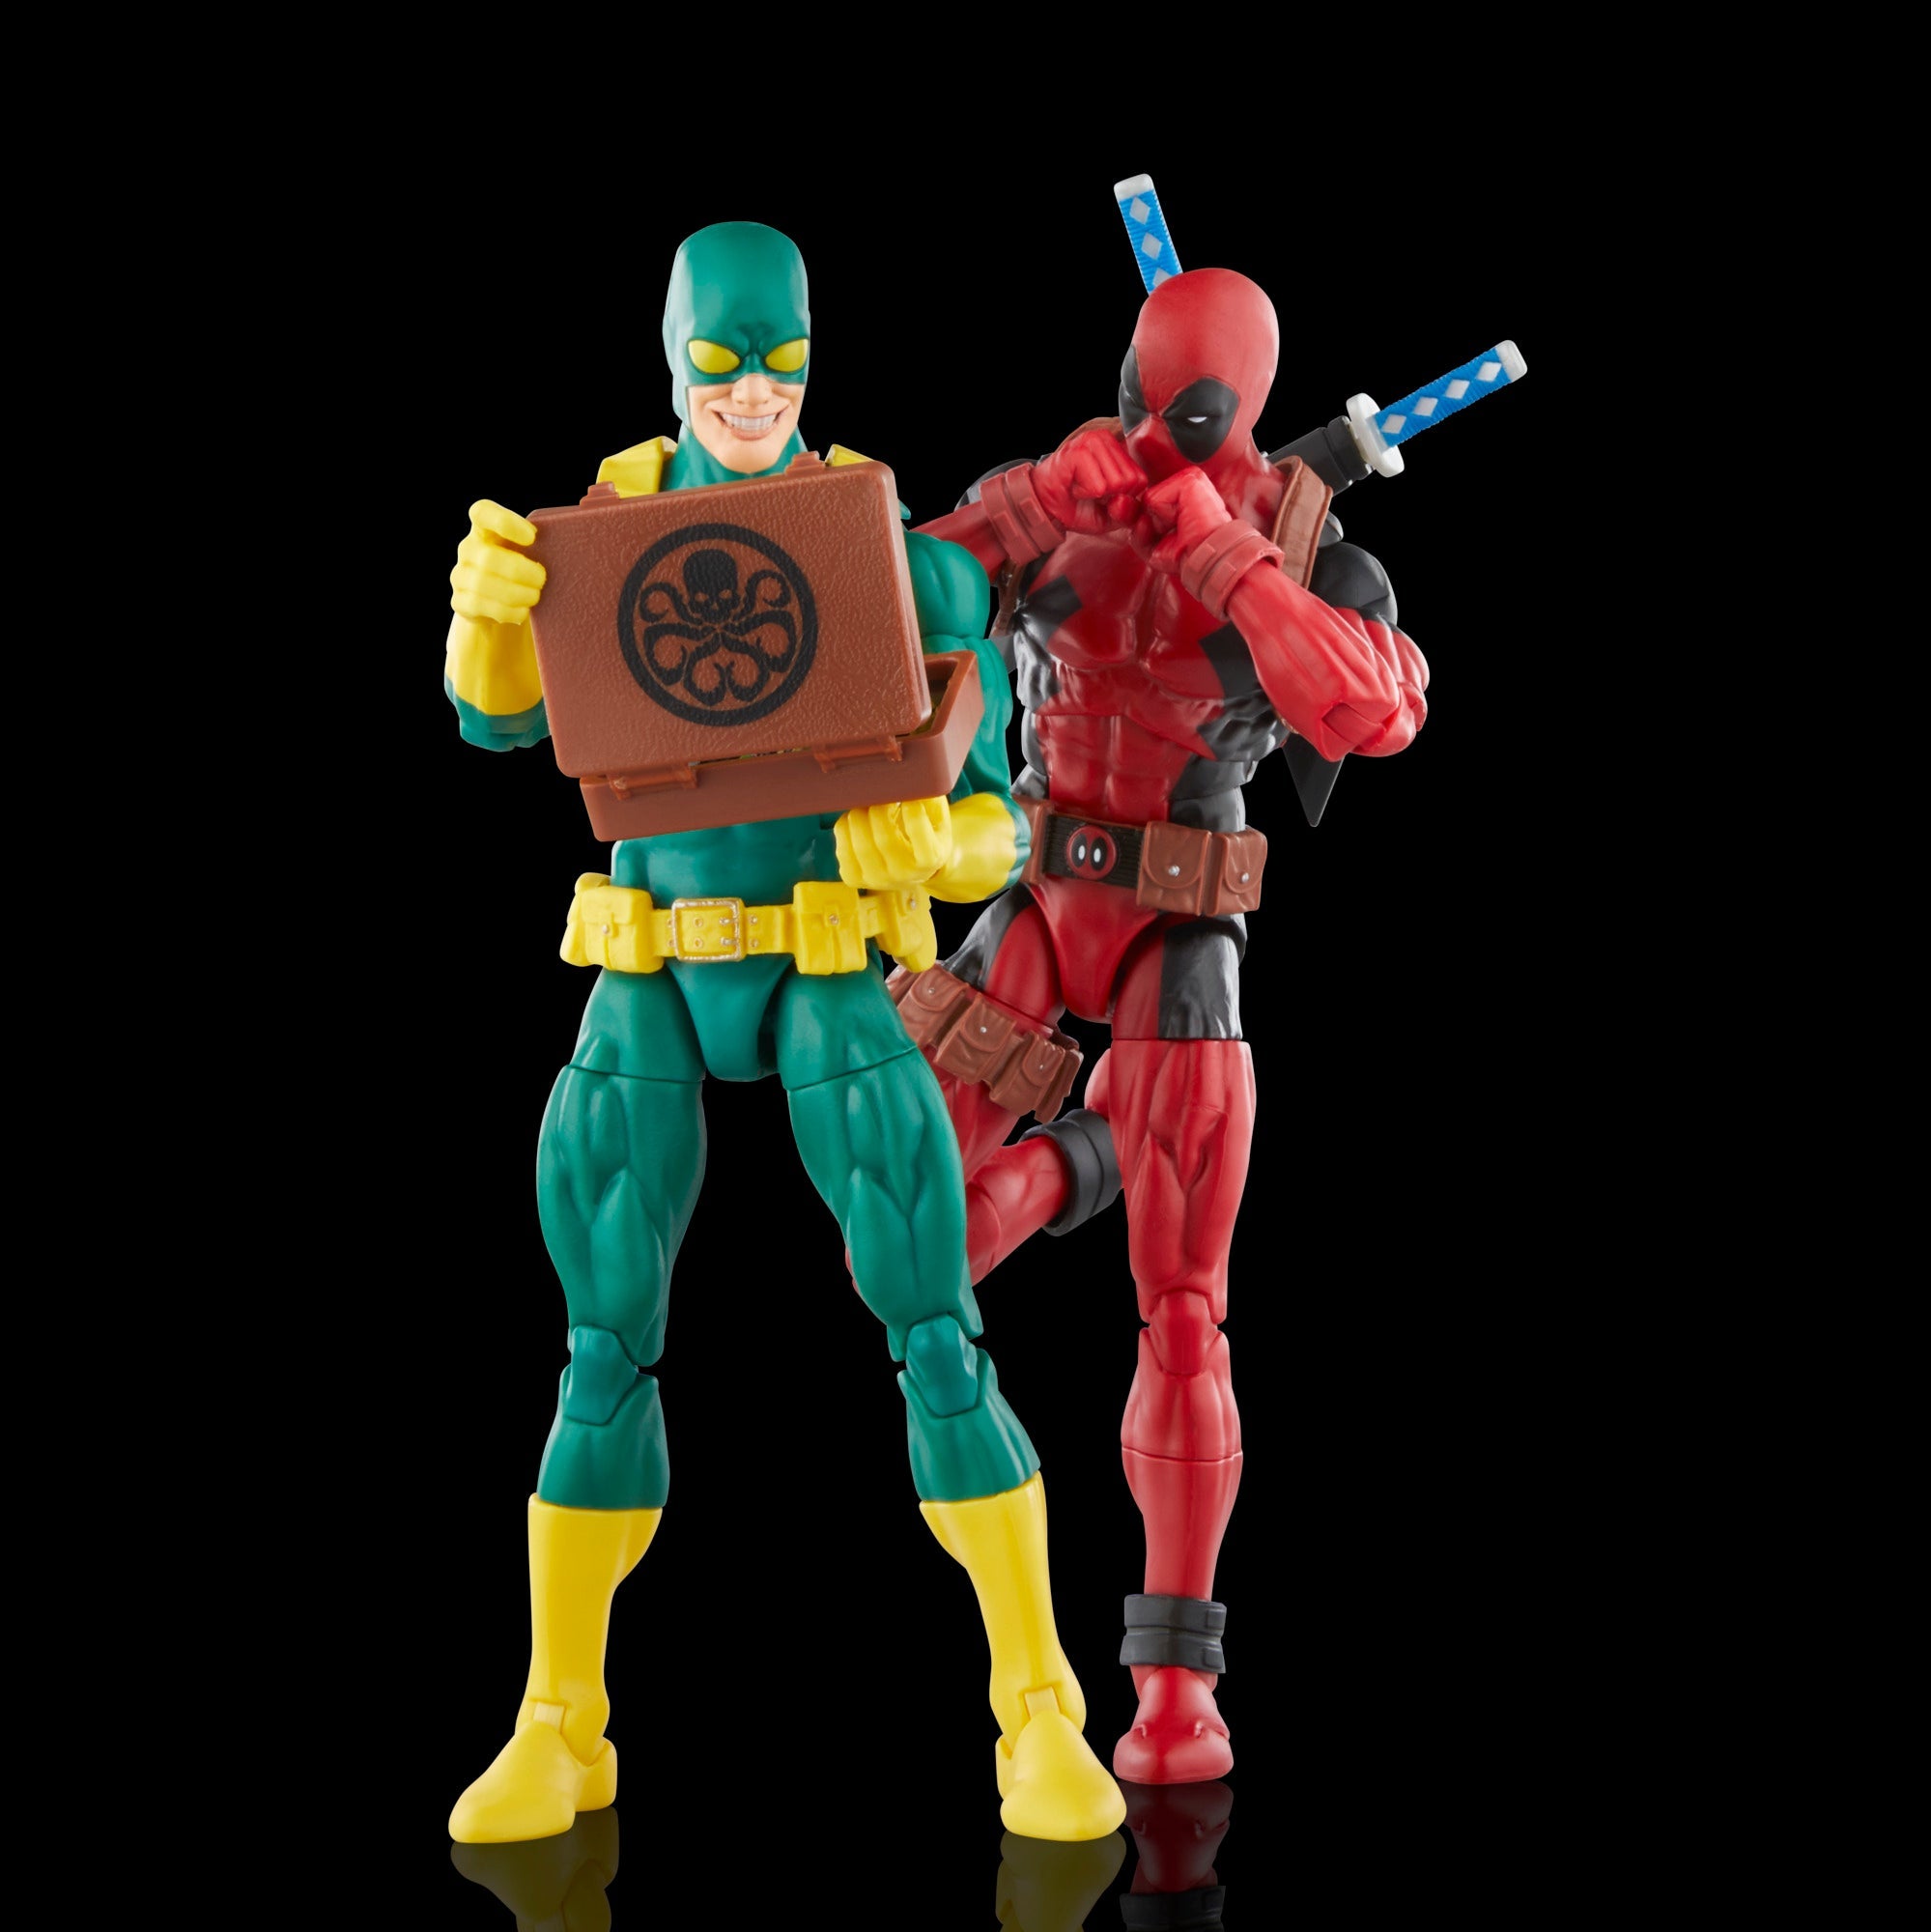 Get pumped for 'Deadpool 2' with all sorts of merchandise available now